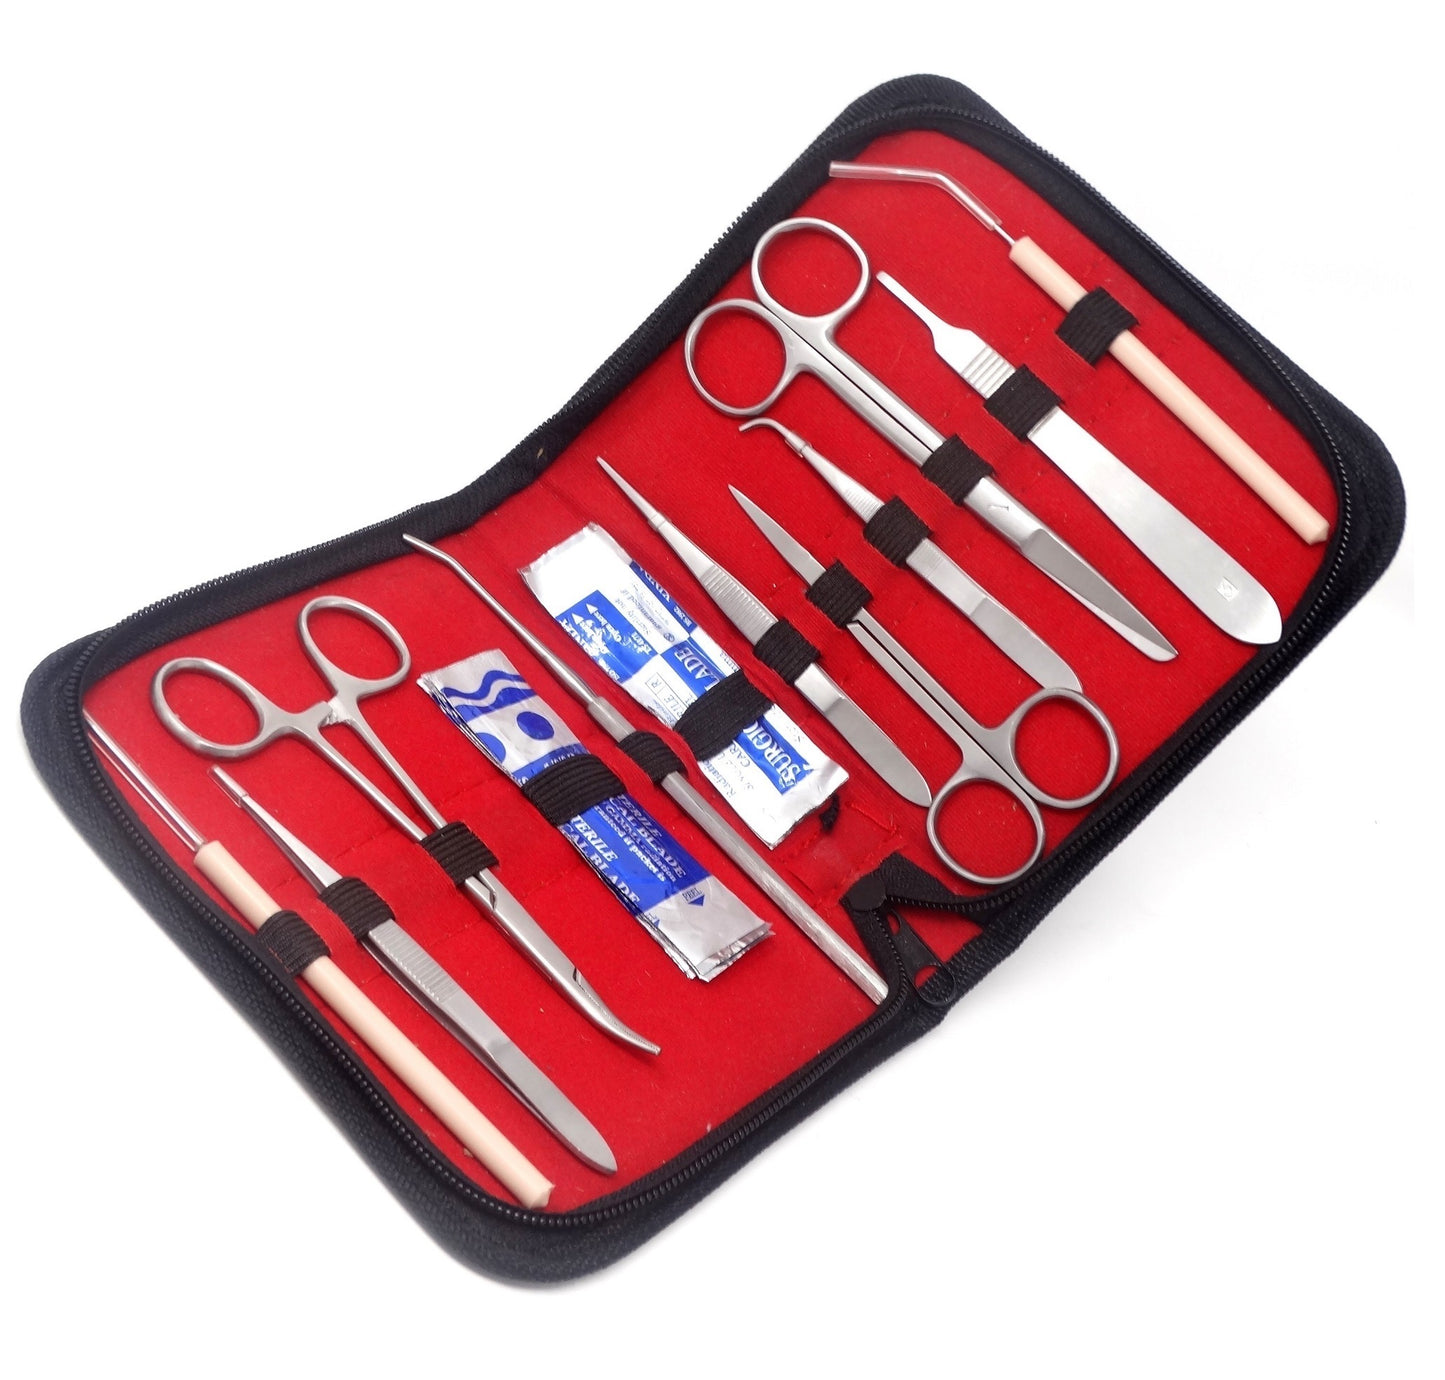 21 Pcs Stainless Steel Dissection Kit with Blades